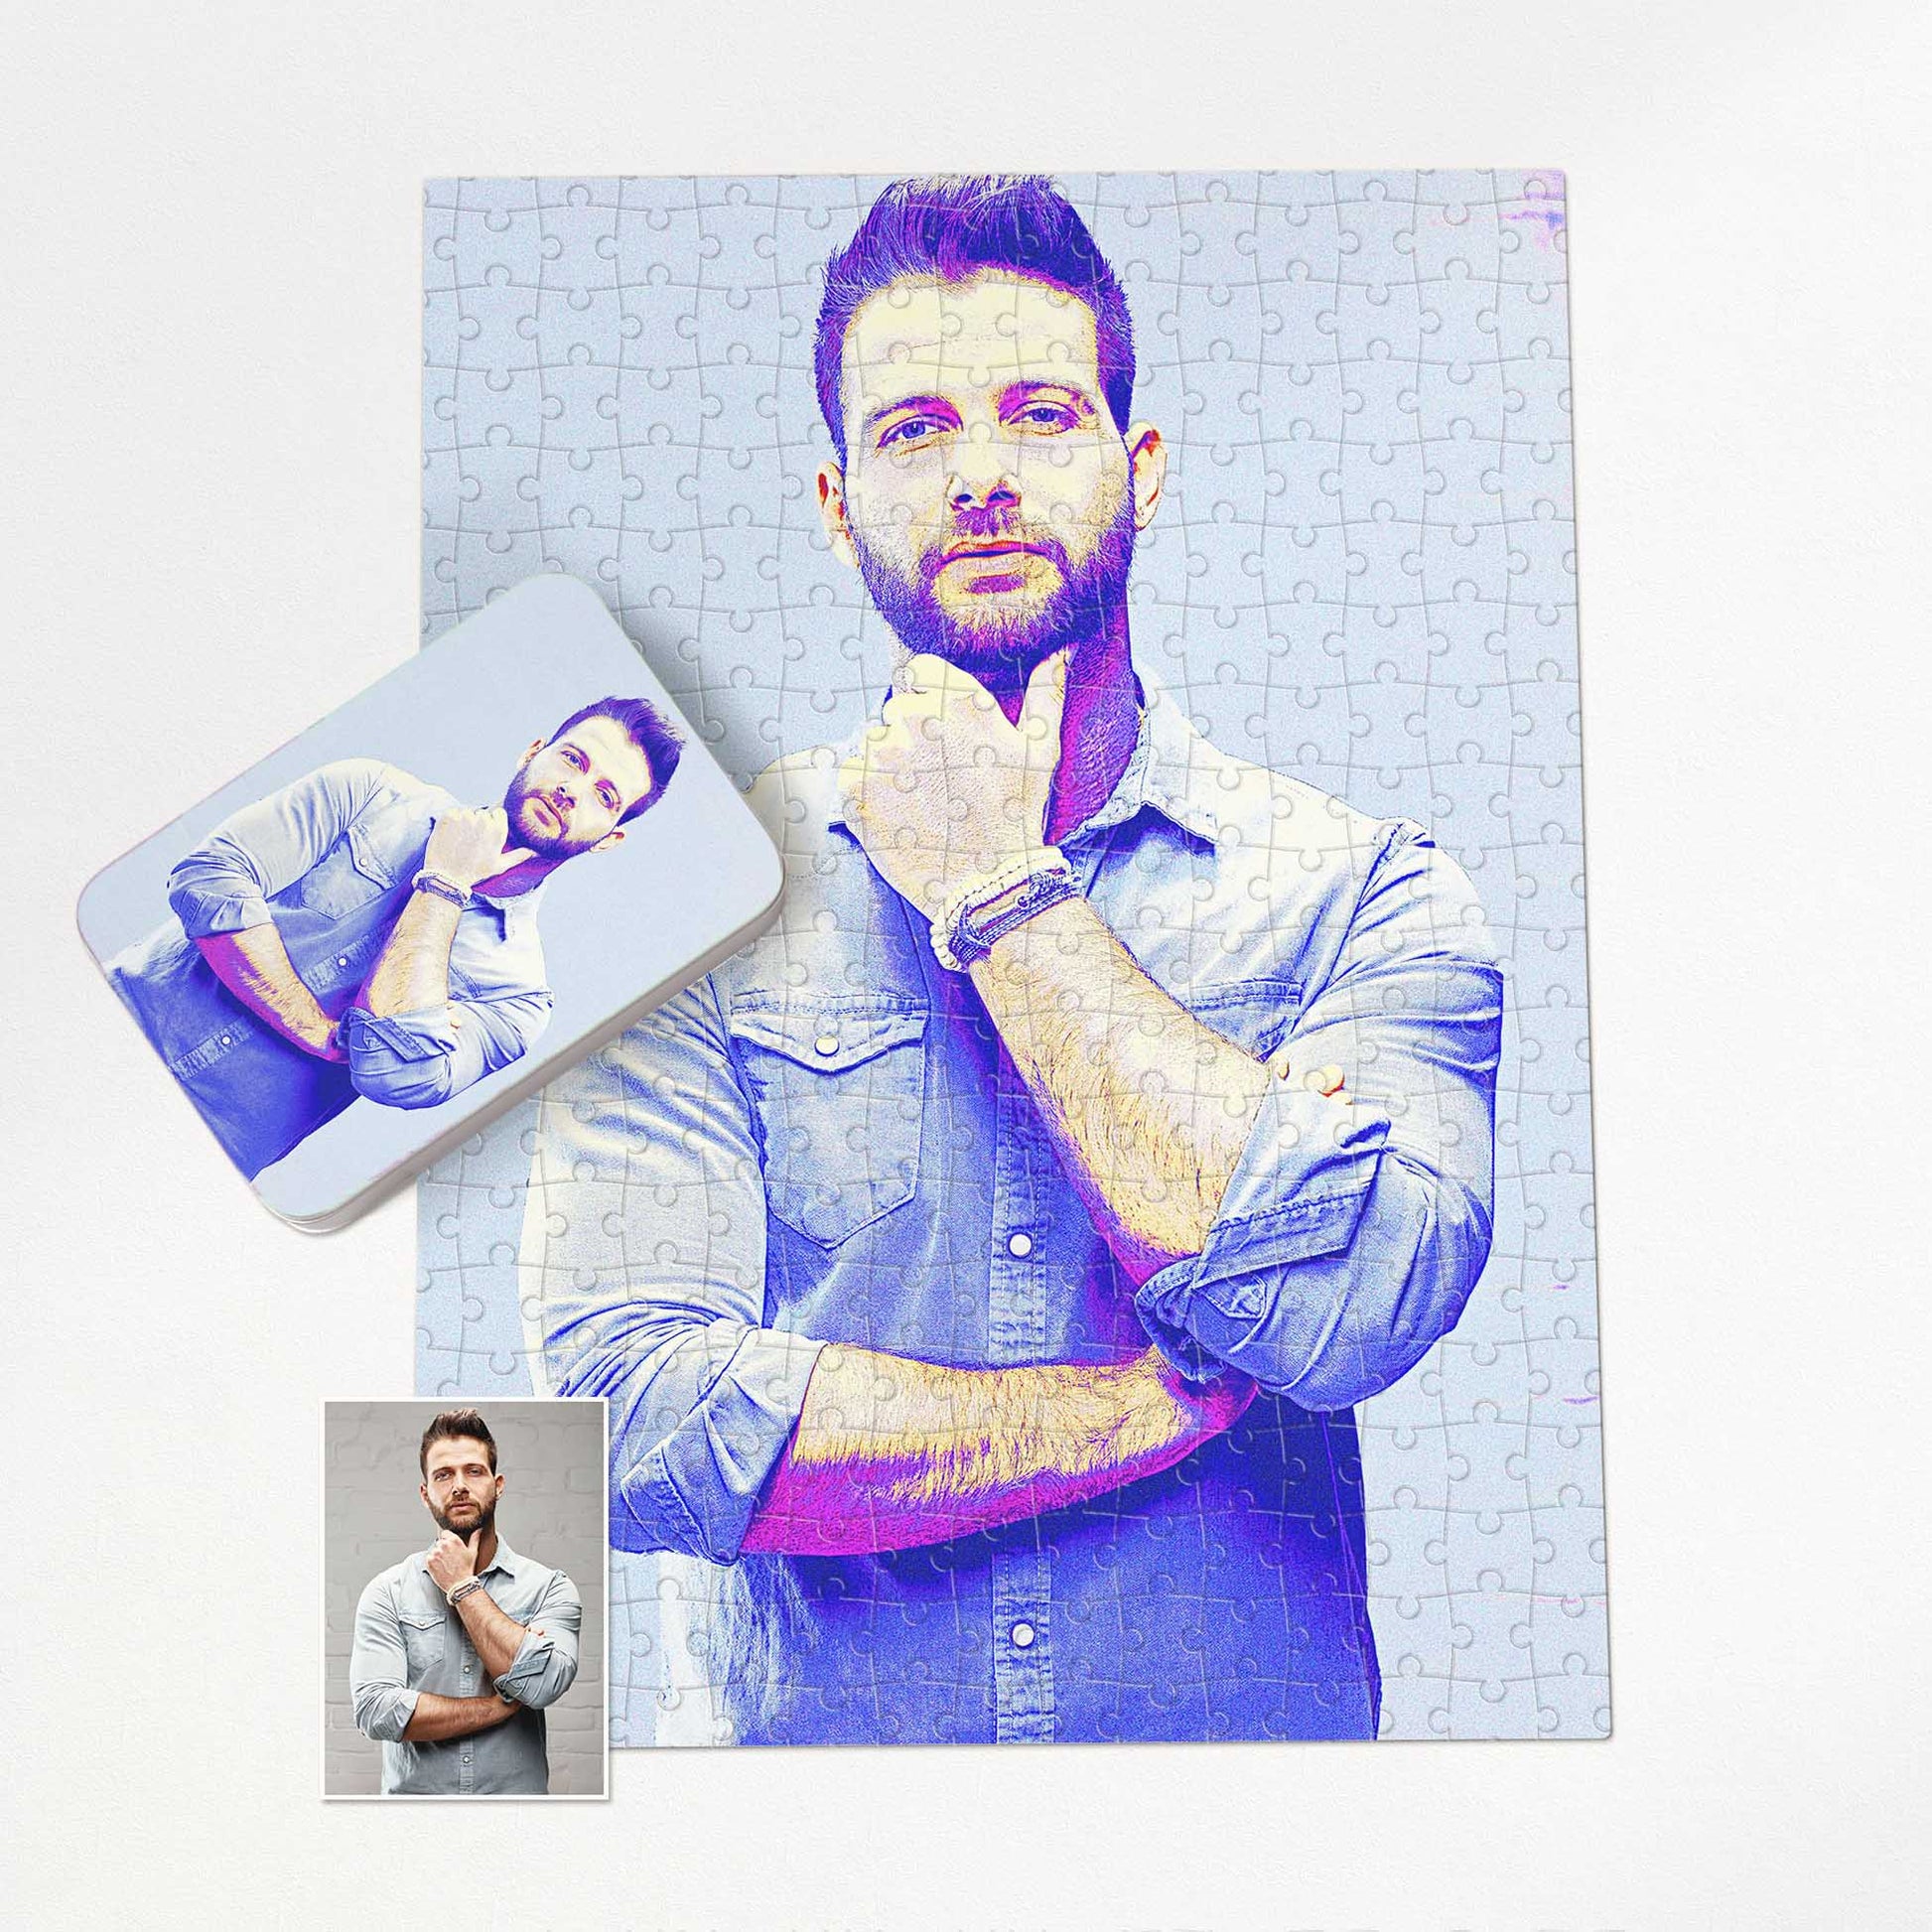 Turn your memories into art with our Blue & Purple Jigsaw Puzzle. The cool and inspirational filter effects will make it a perfect gift for any occasion